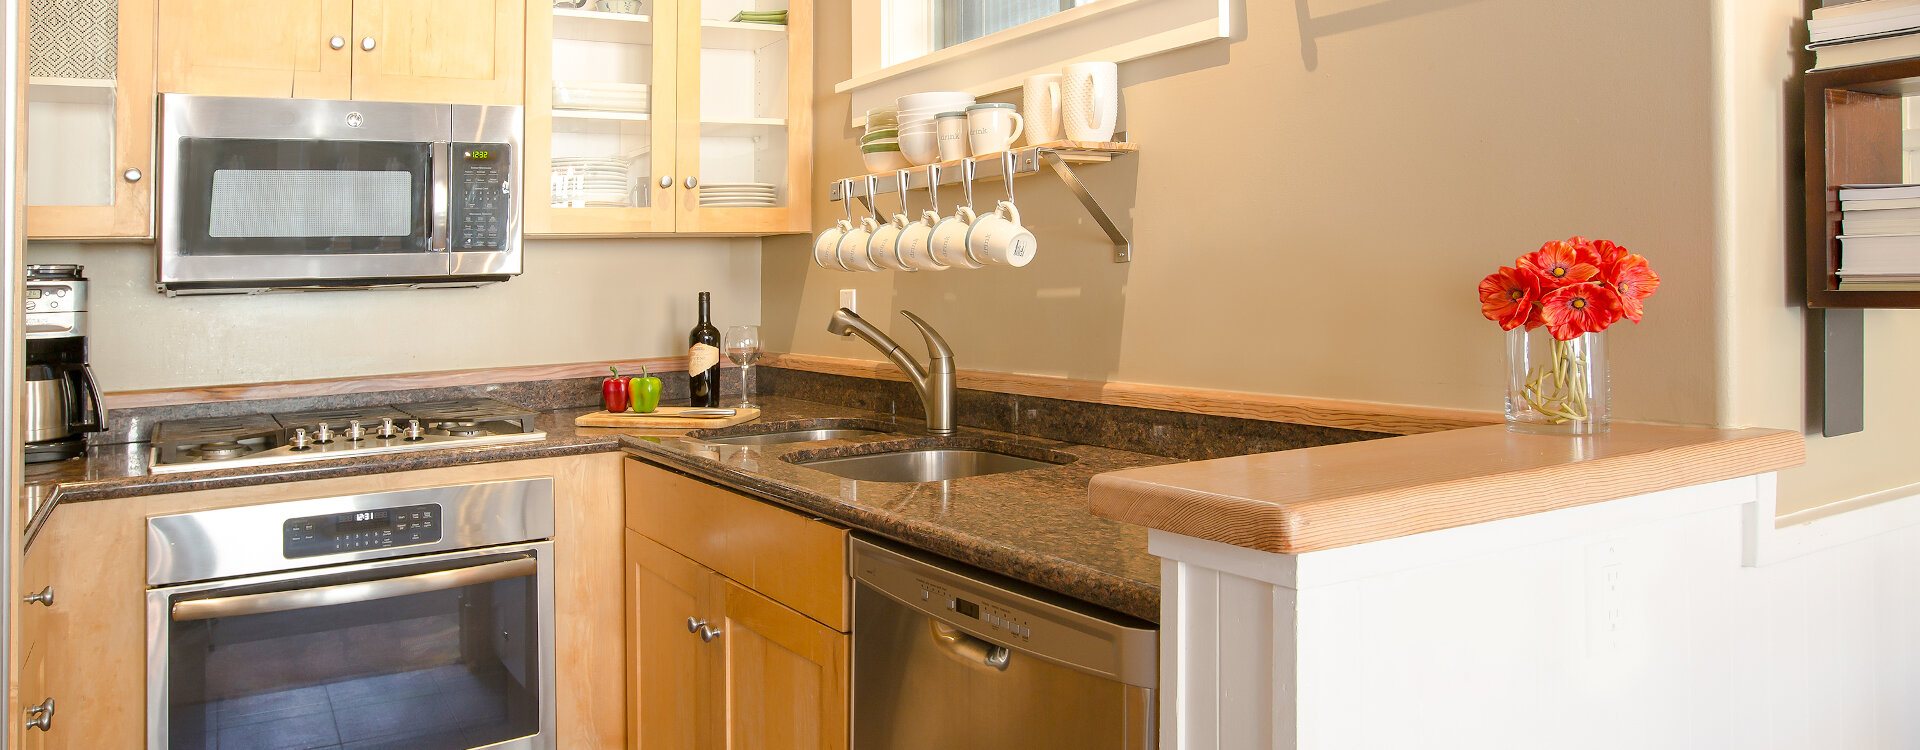 7-Telluride-Pacific-Place-Too-Kitchen-Web